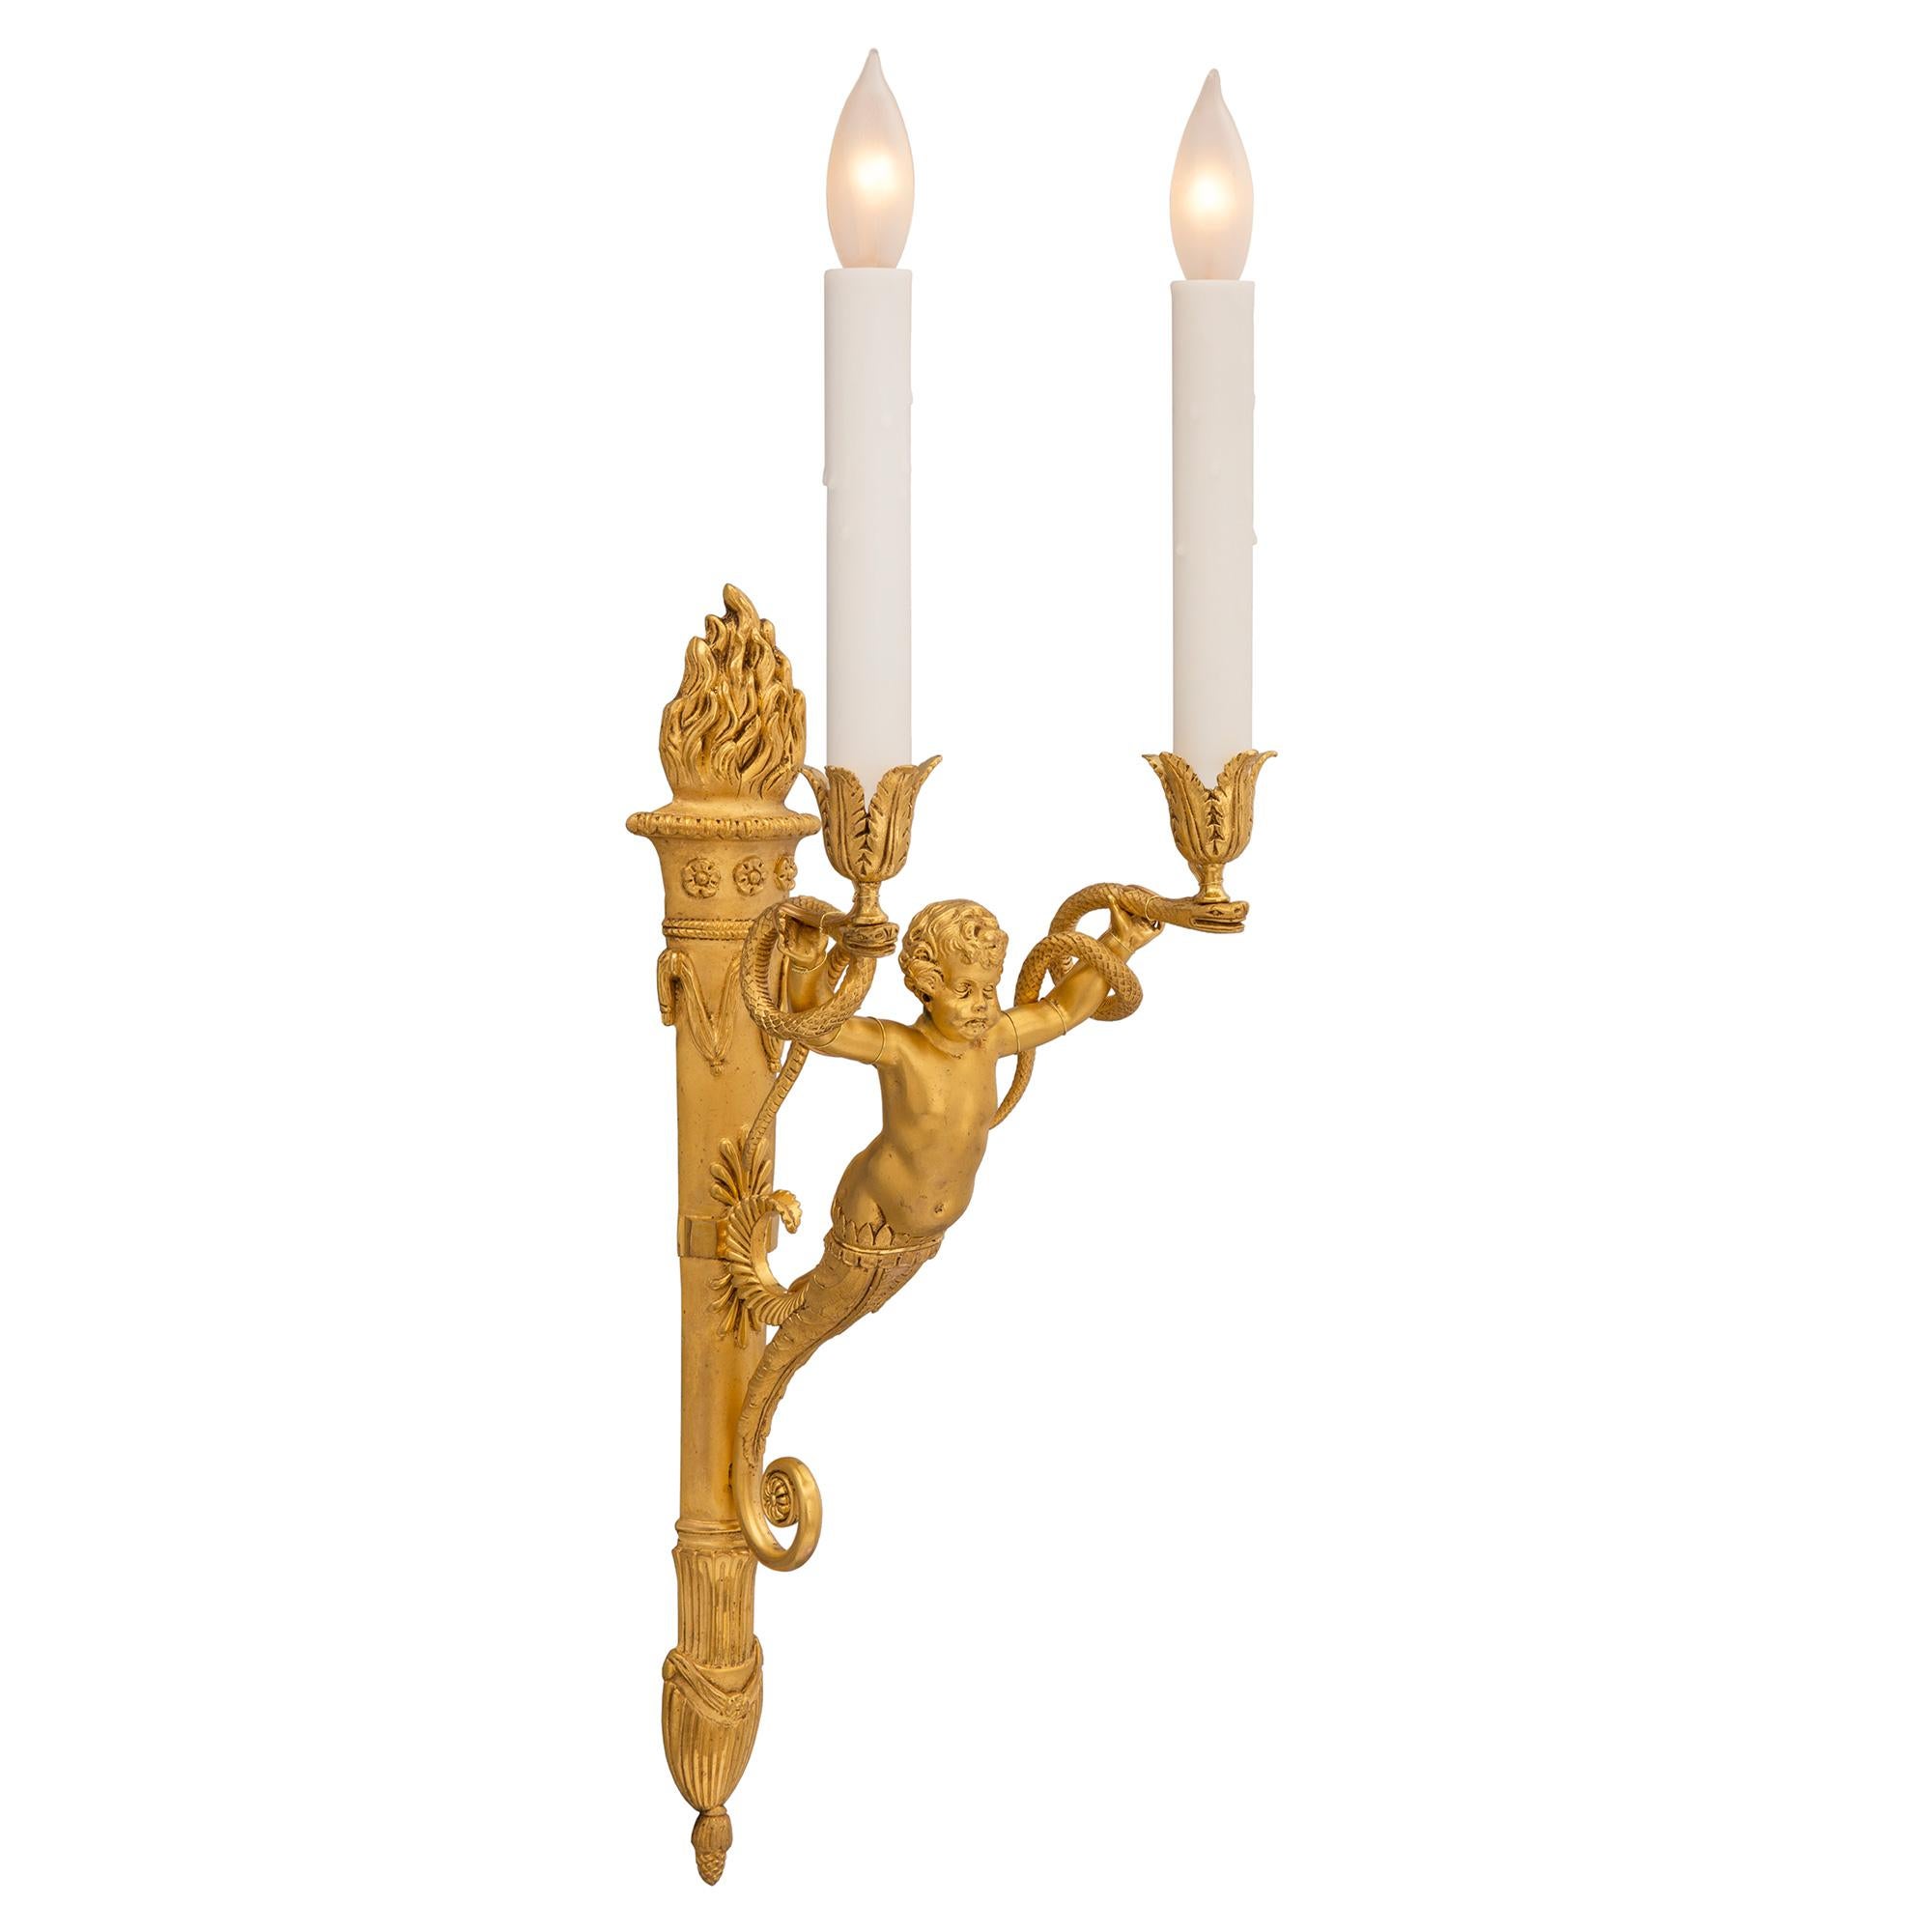 A charming and high quality complete set of eight French 19th century Neo-Classical ormolu two arm sconces, attributed to Pierre-Philippe Thomire. Each sconce is centered by an elegant tapered back plate in the shape of a quiver with a fine bottom